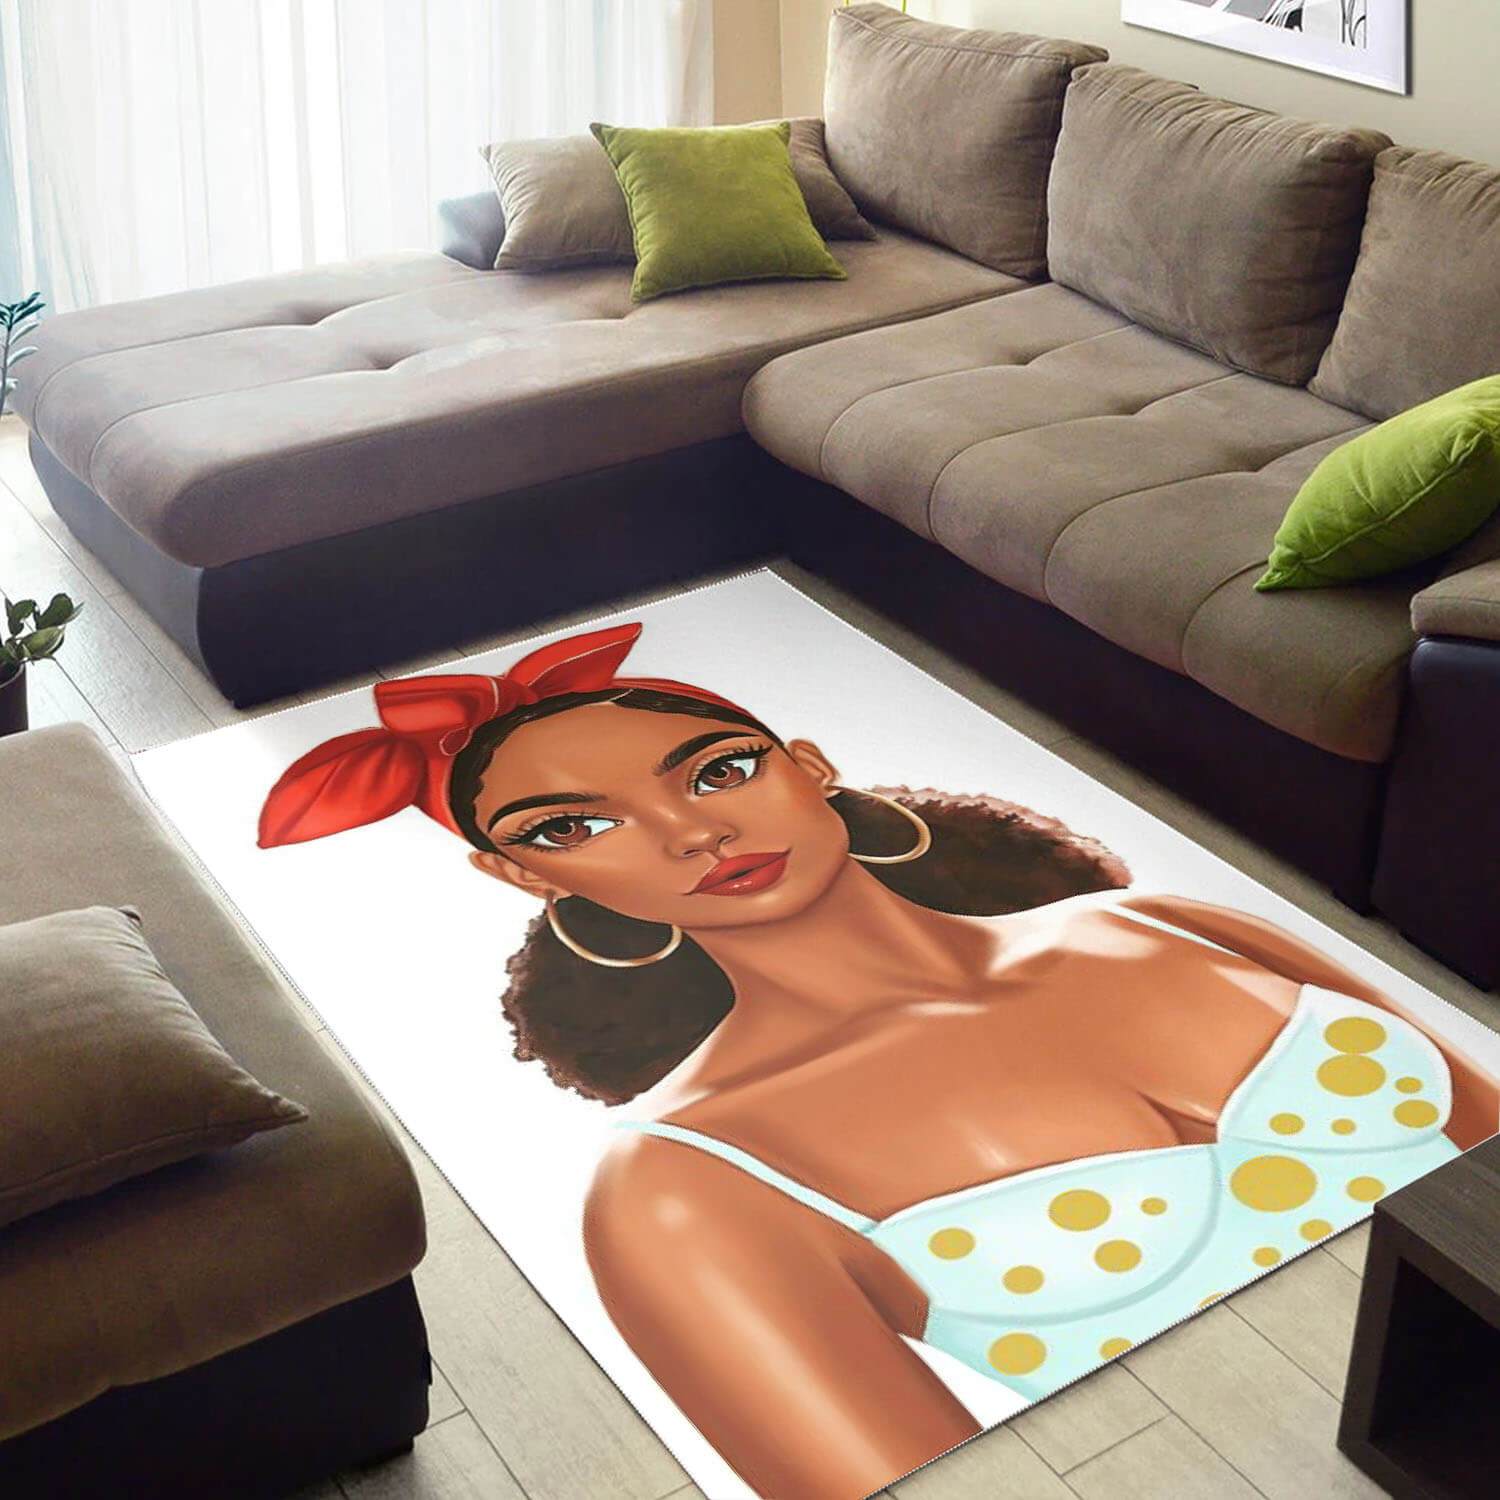 African American Area Rugs Beautiful Girl With Afro African Design Floor Rug Afrocentric Home Decor And Style WBG19592